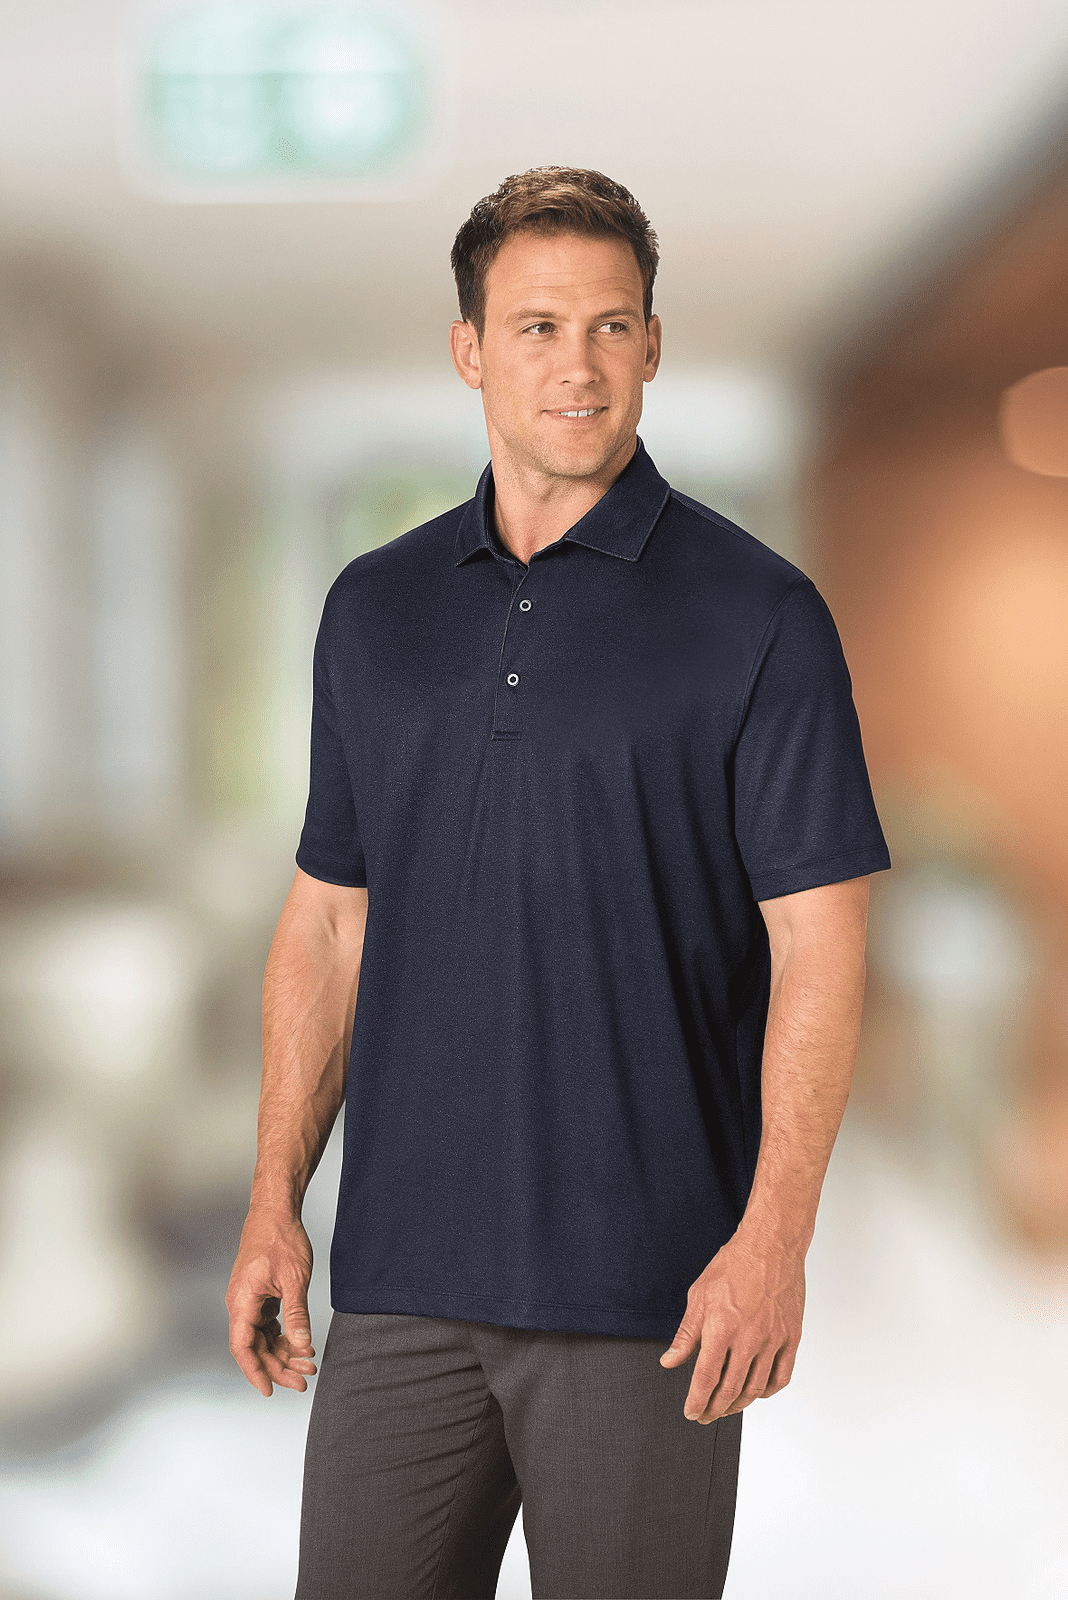 Paragon 152 Derby Sublimated Heathered Polo - Navy Heather - HIT a Double